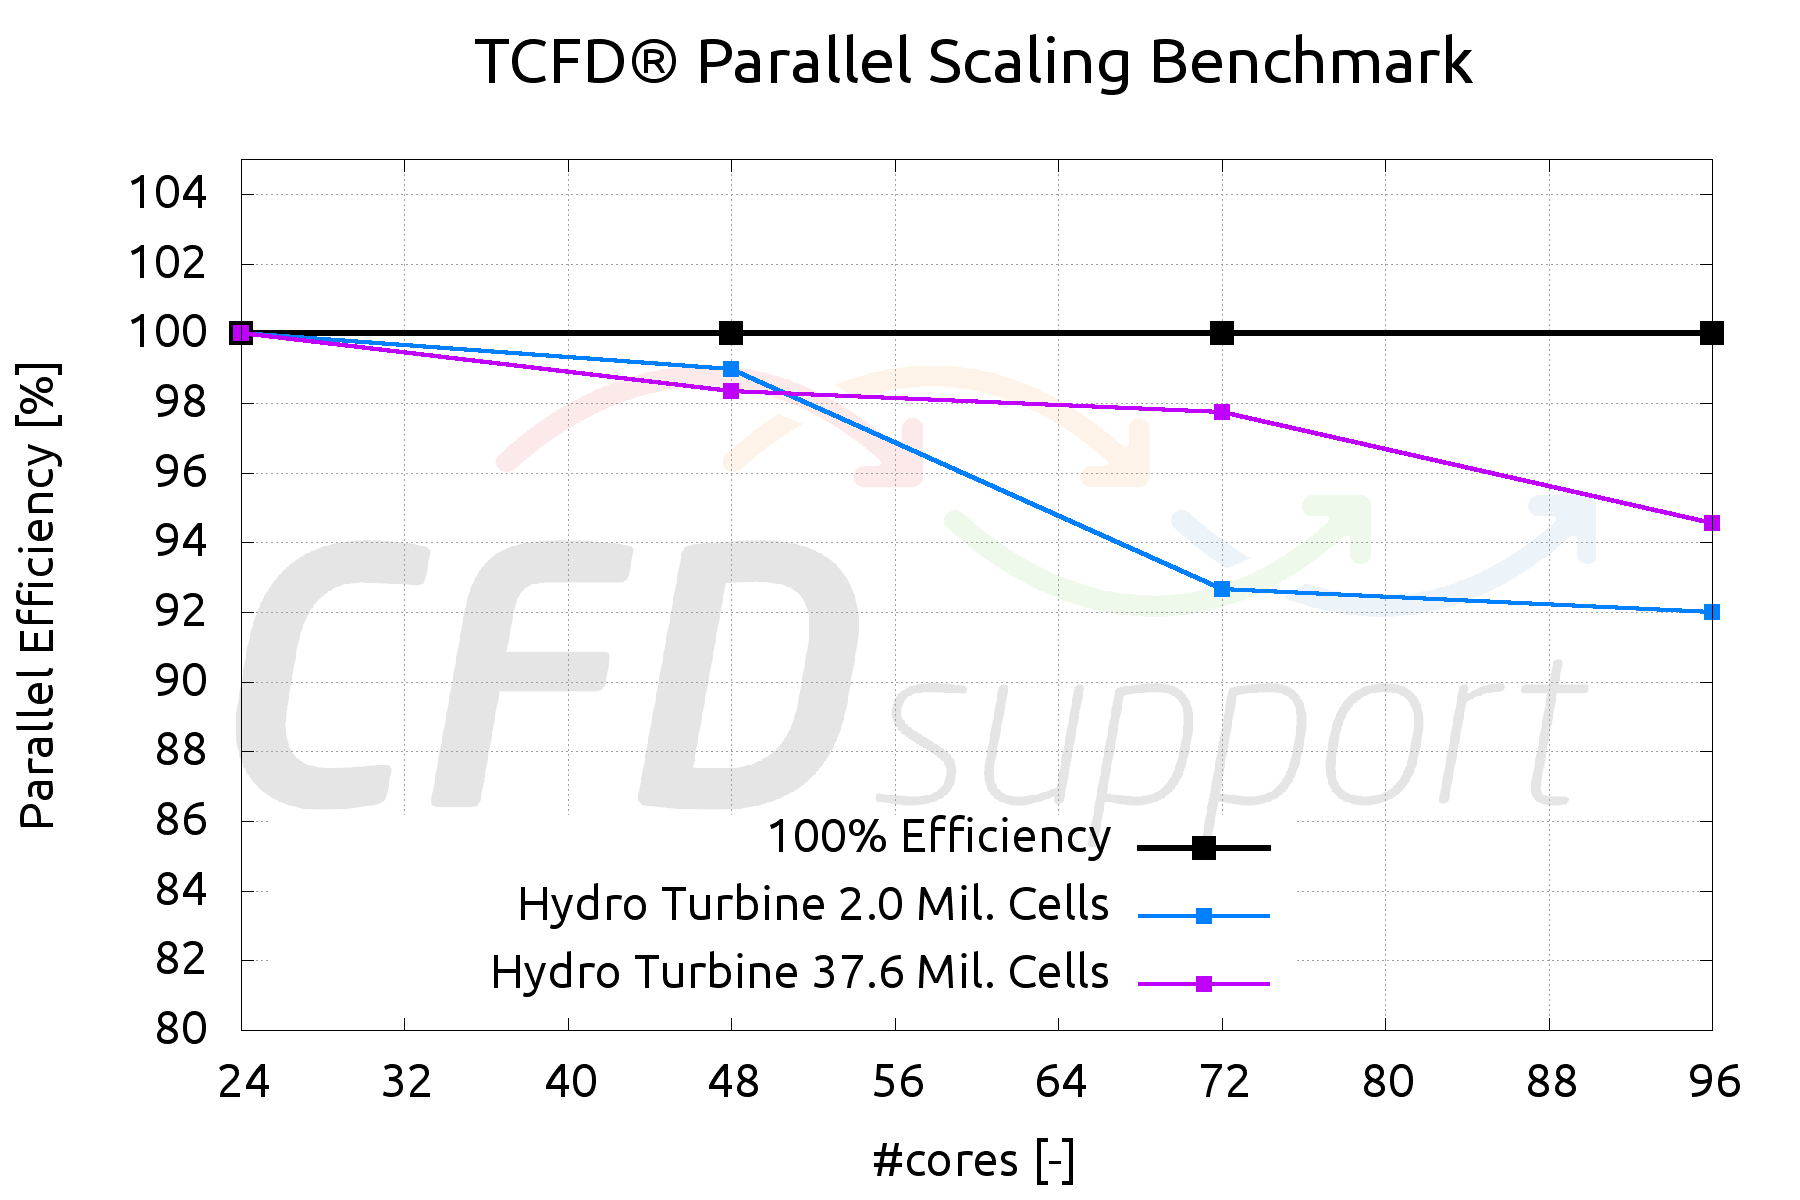 TCFD parallel scaling benchmark Efficiency NumberOfCores